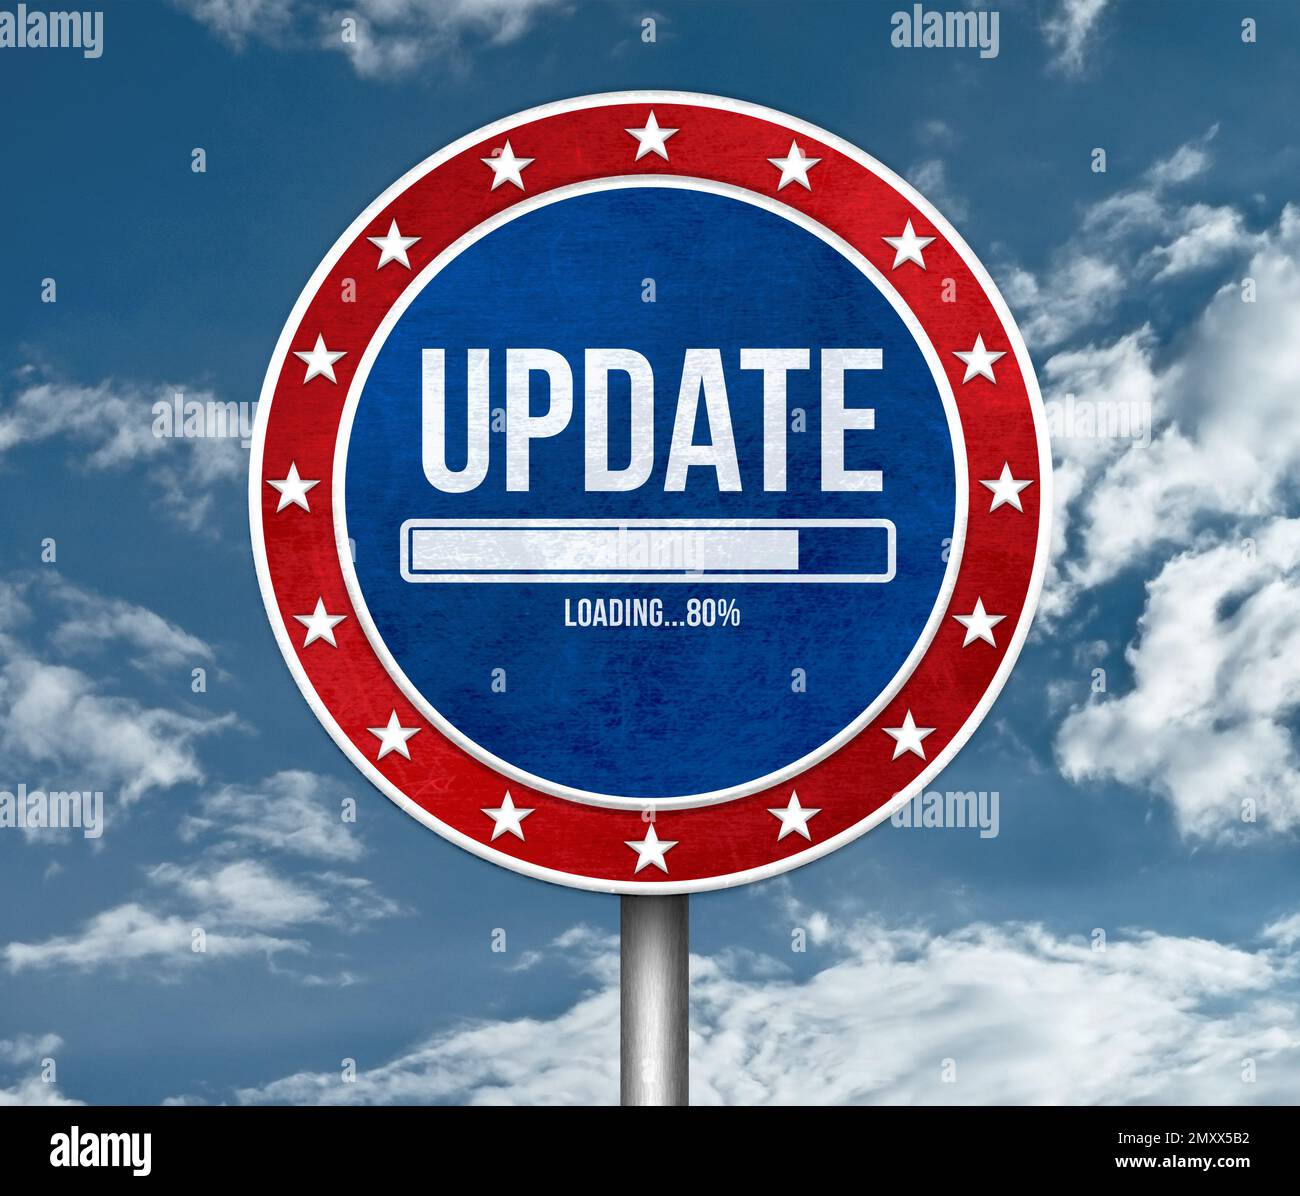 Update - road sign message with loading process bar Stock Photo